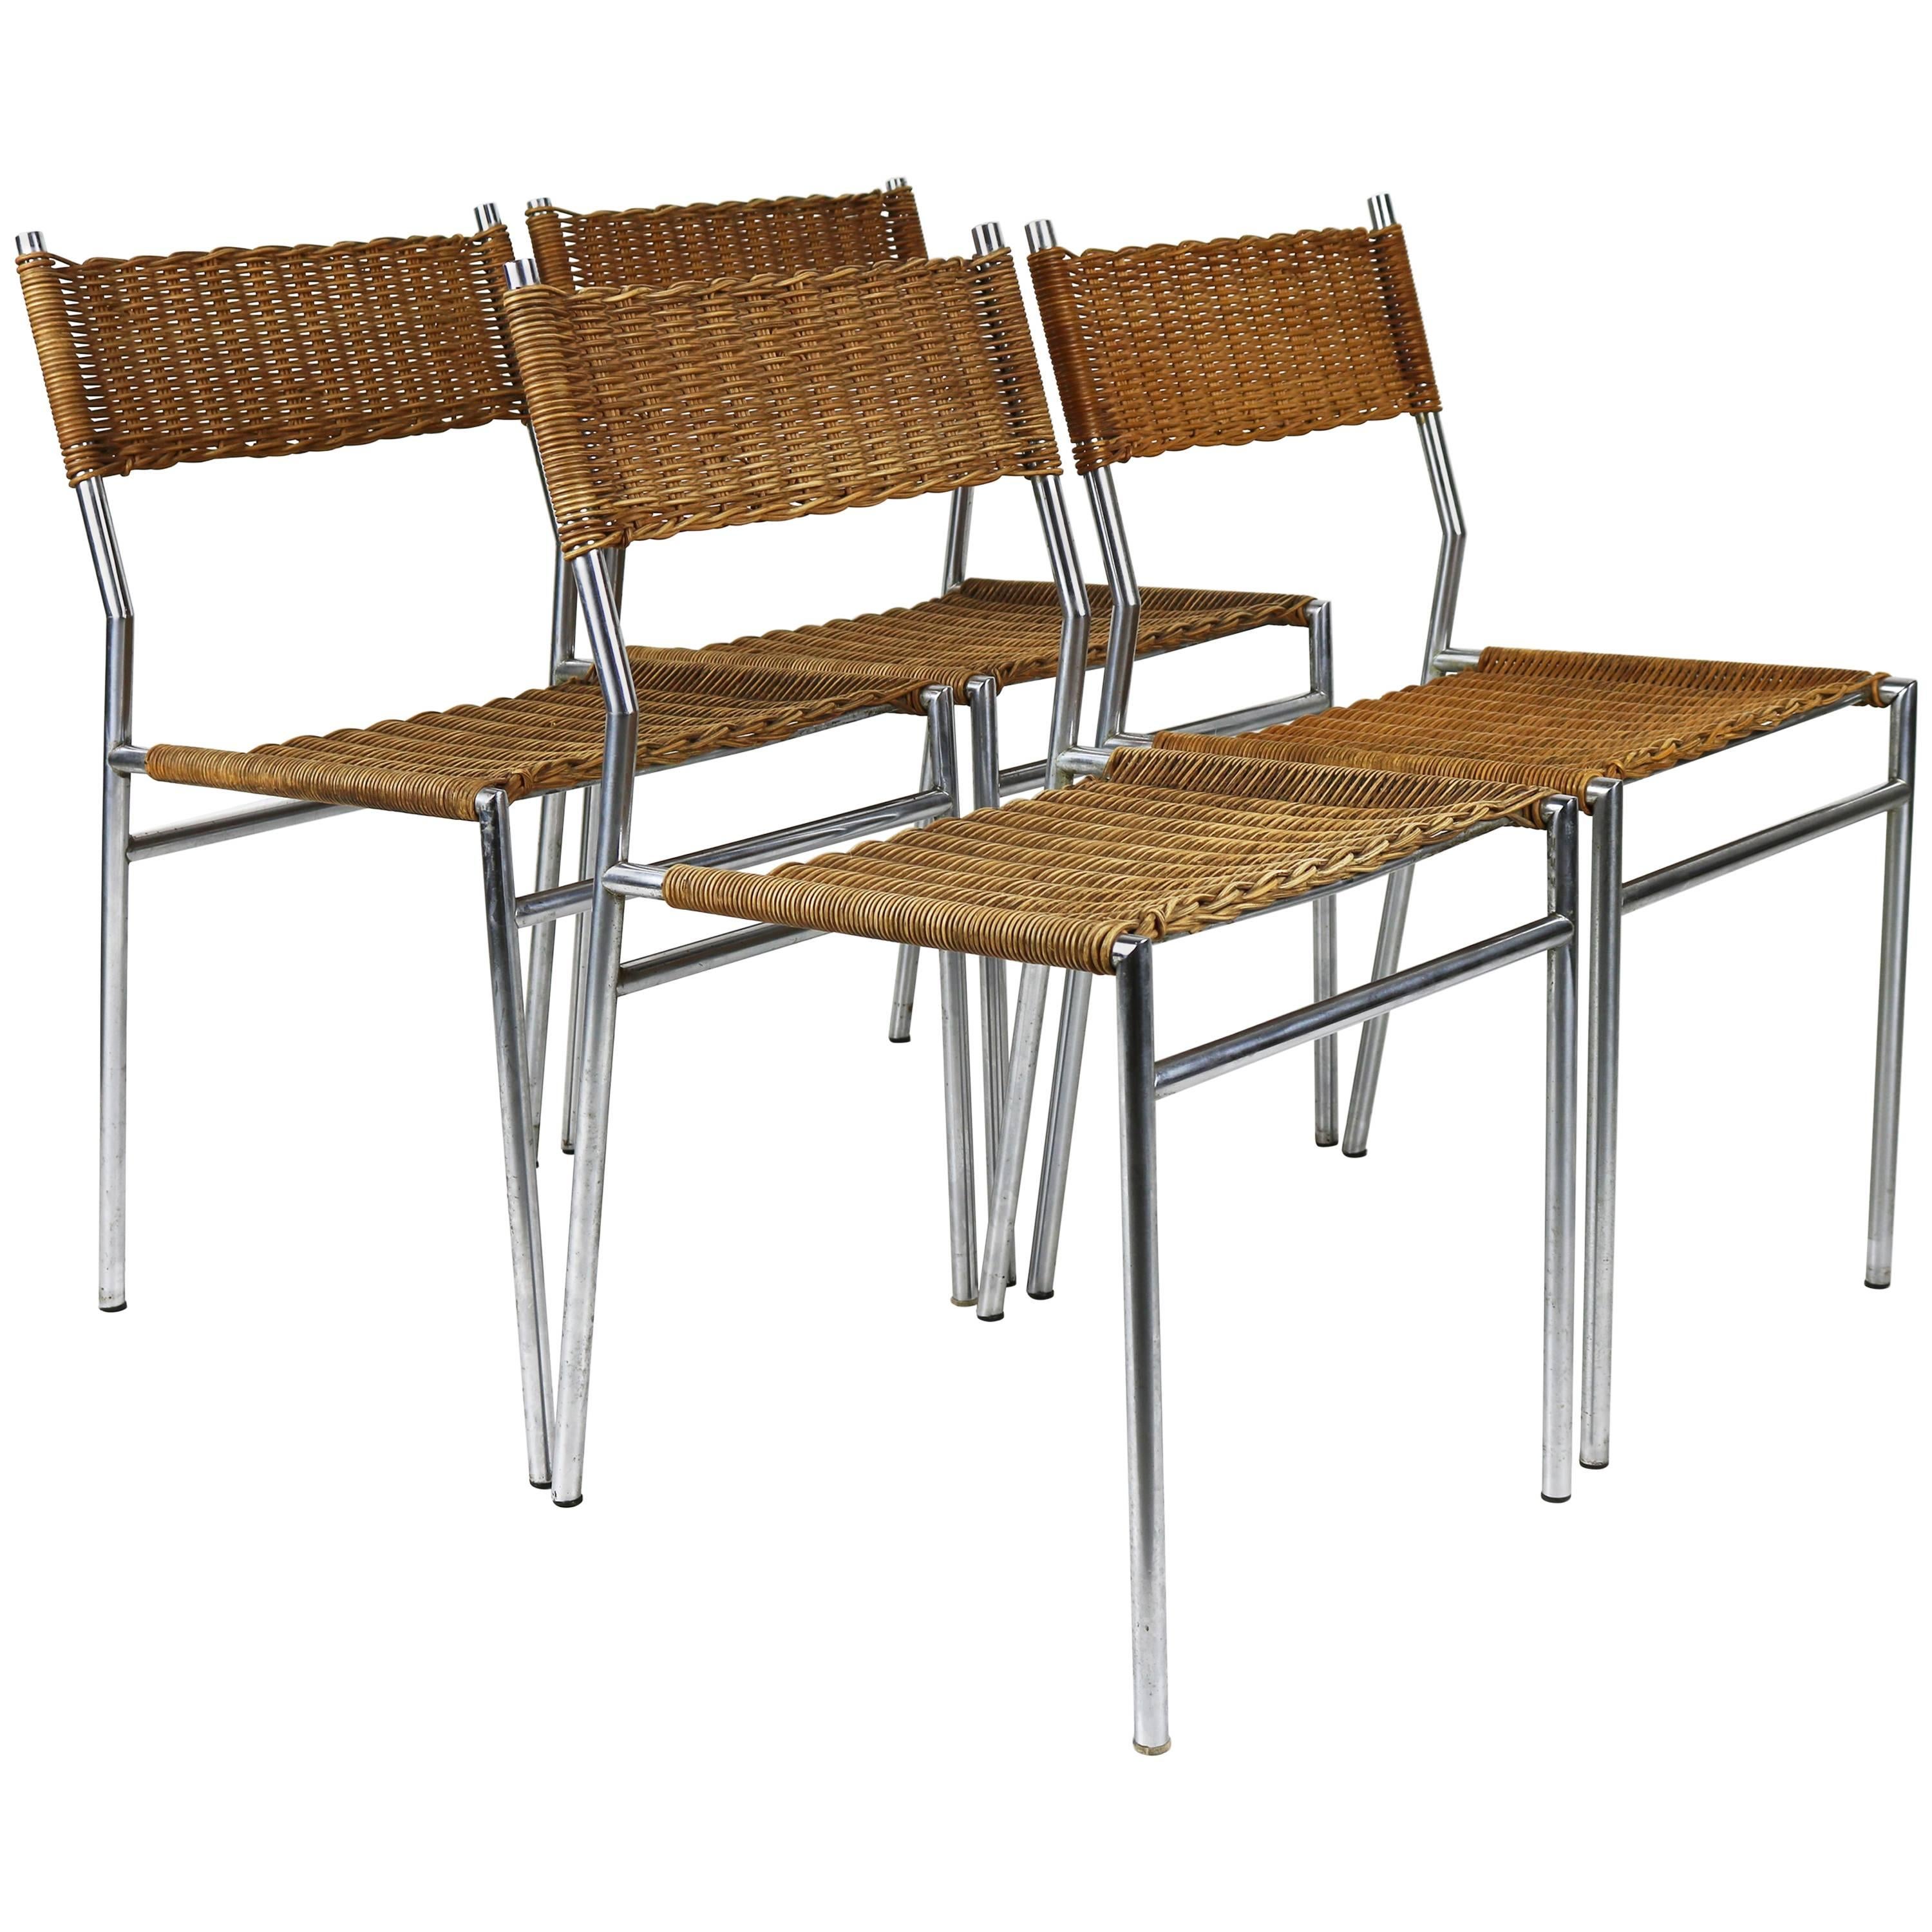 Set of Four SE06 Chairs by Martin Visser for 't Spectrum, 1962 Chrome Rattan